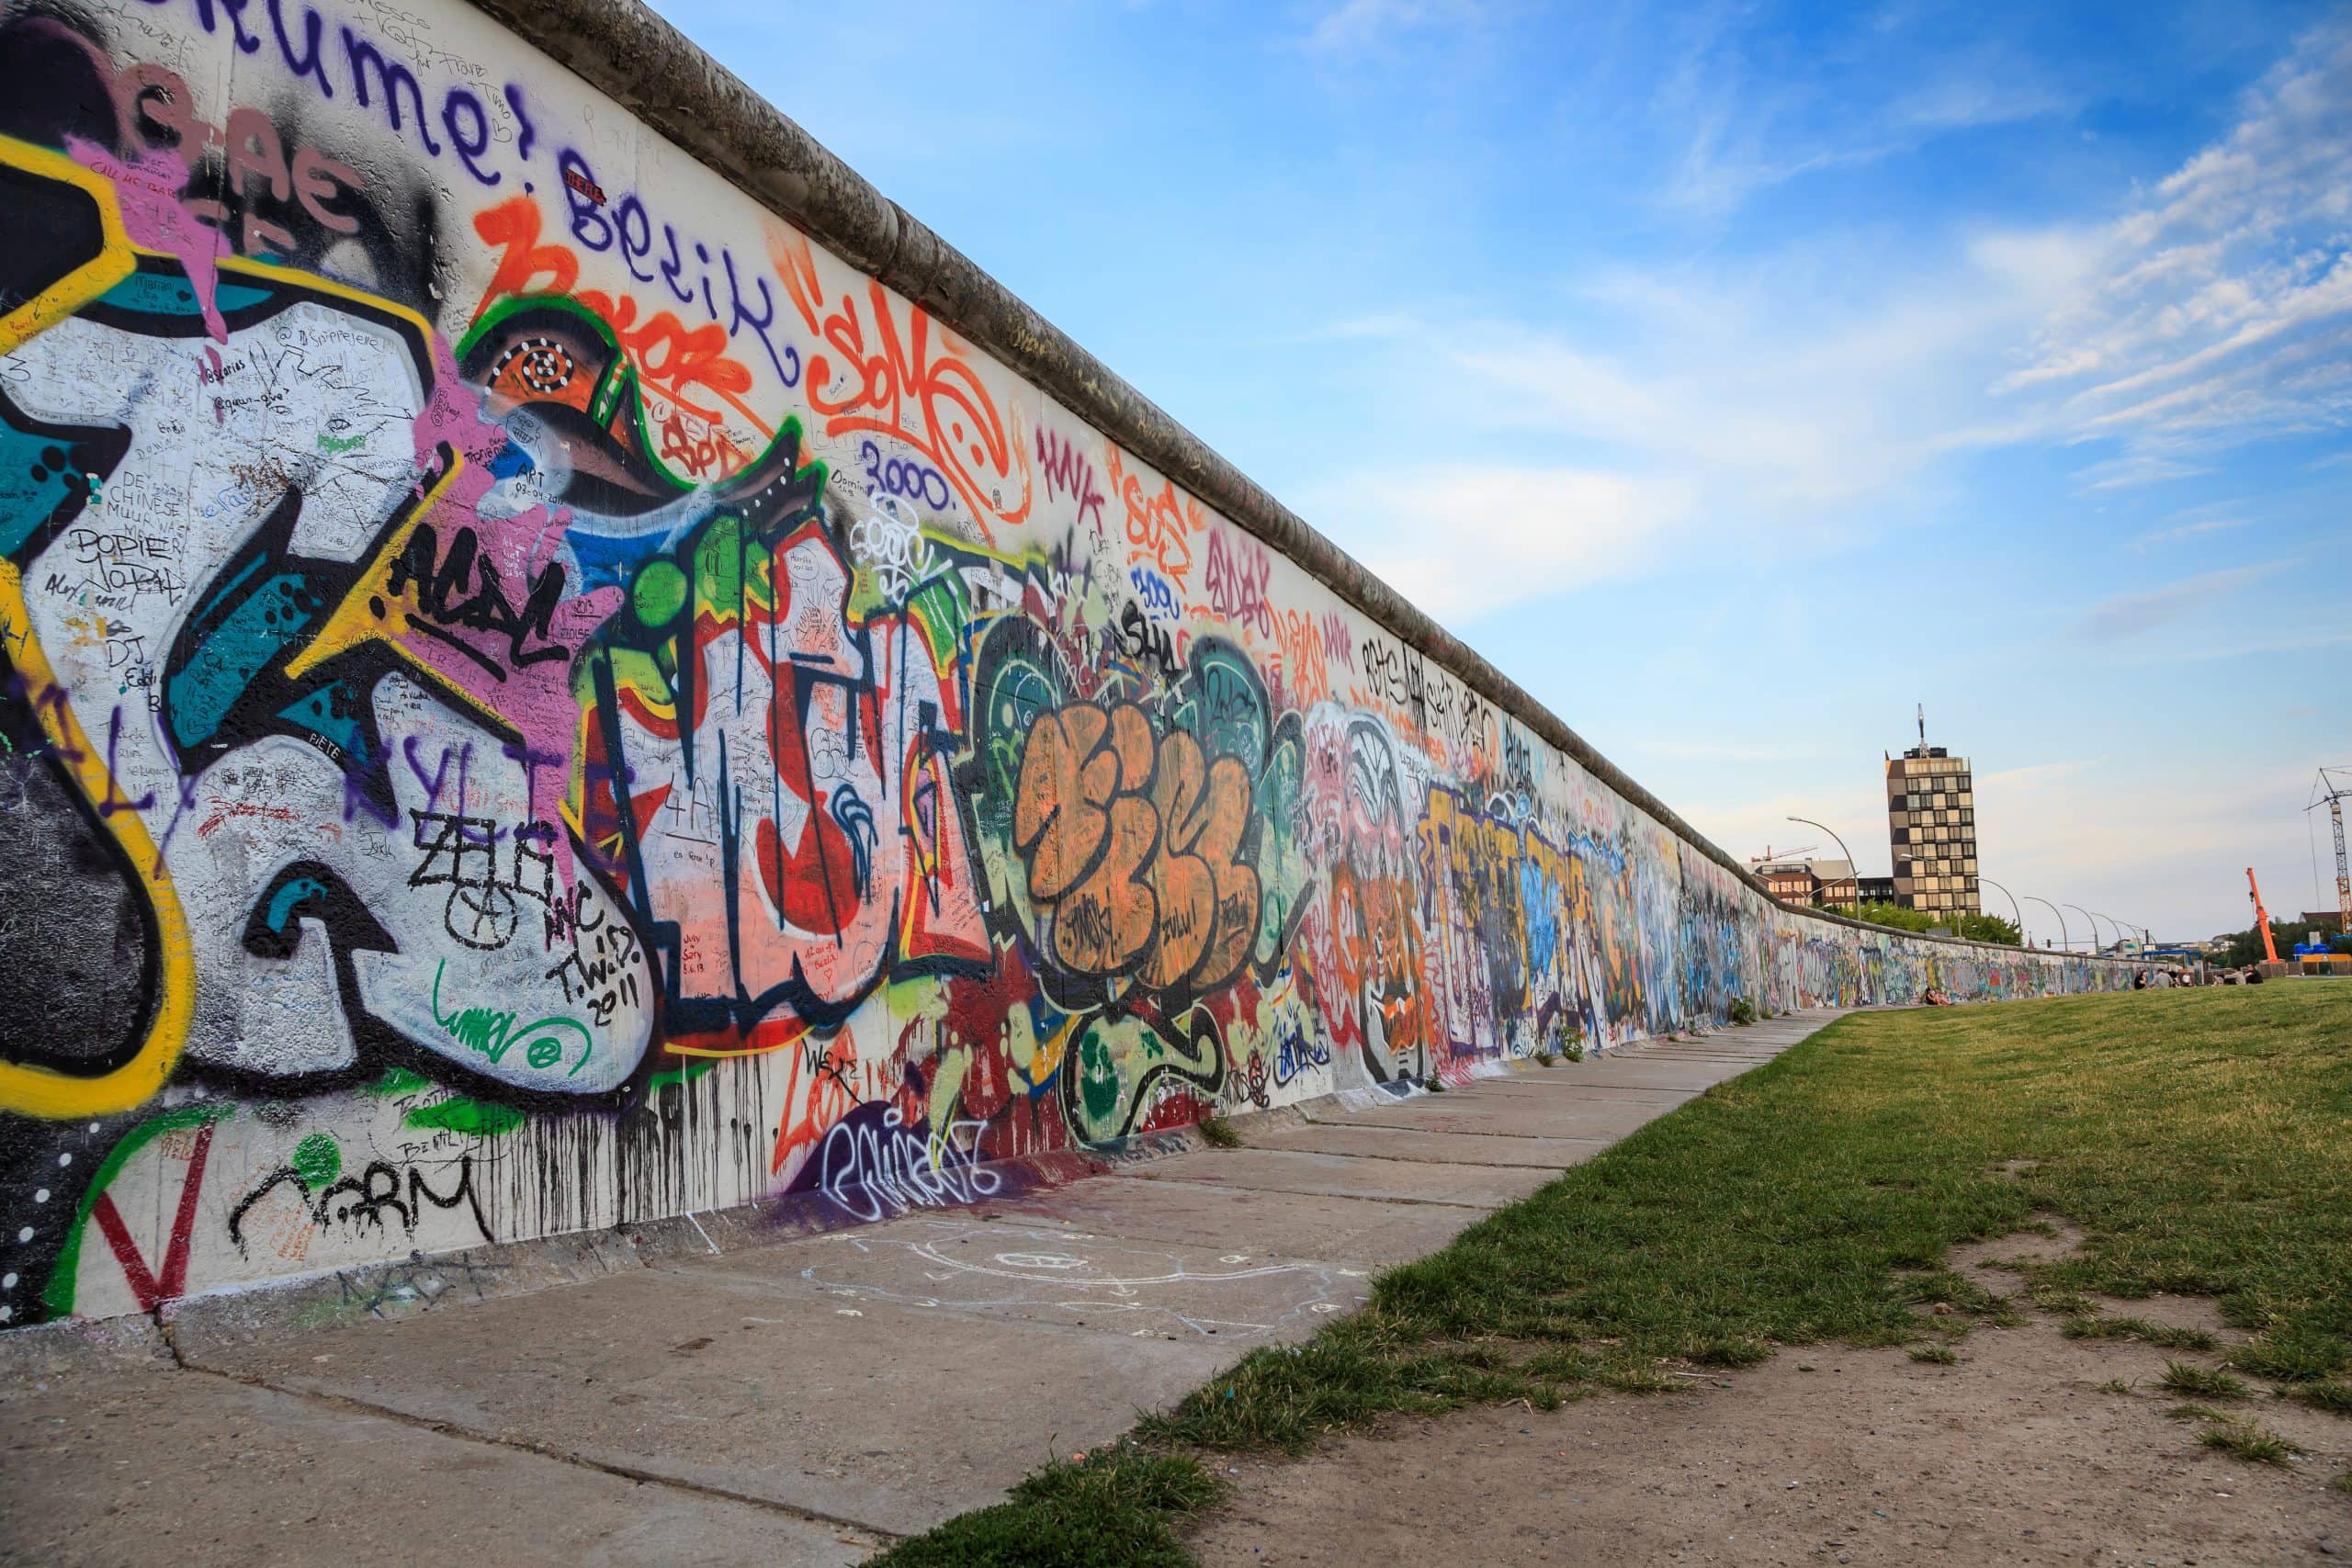 Berlin Wall is being built in The Sandbox – and then torn down again